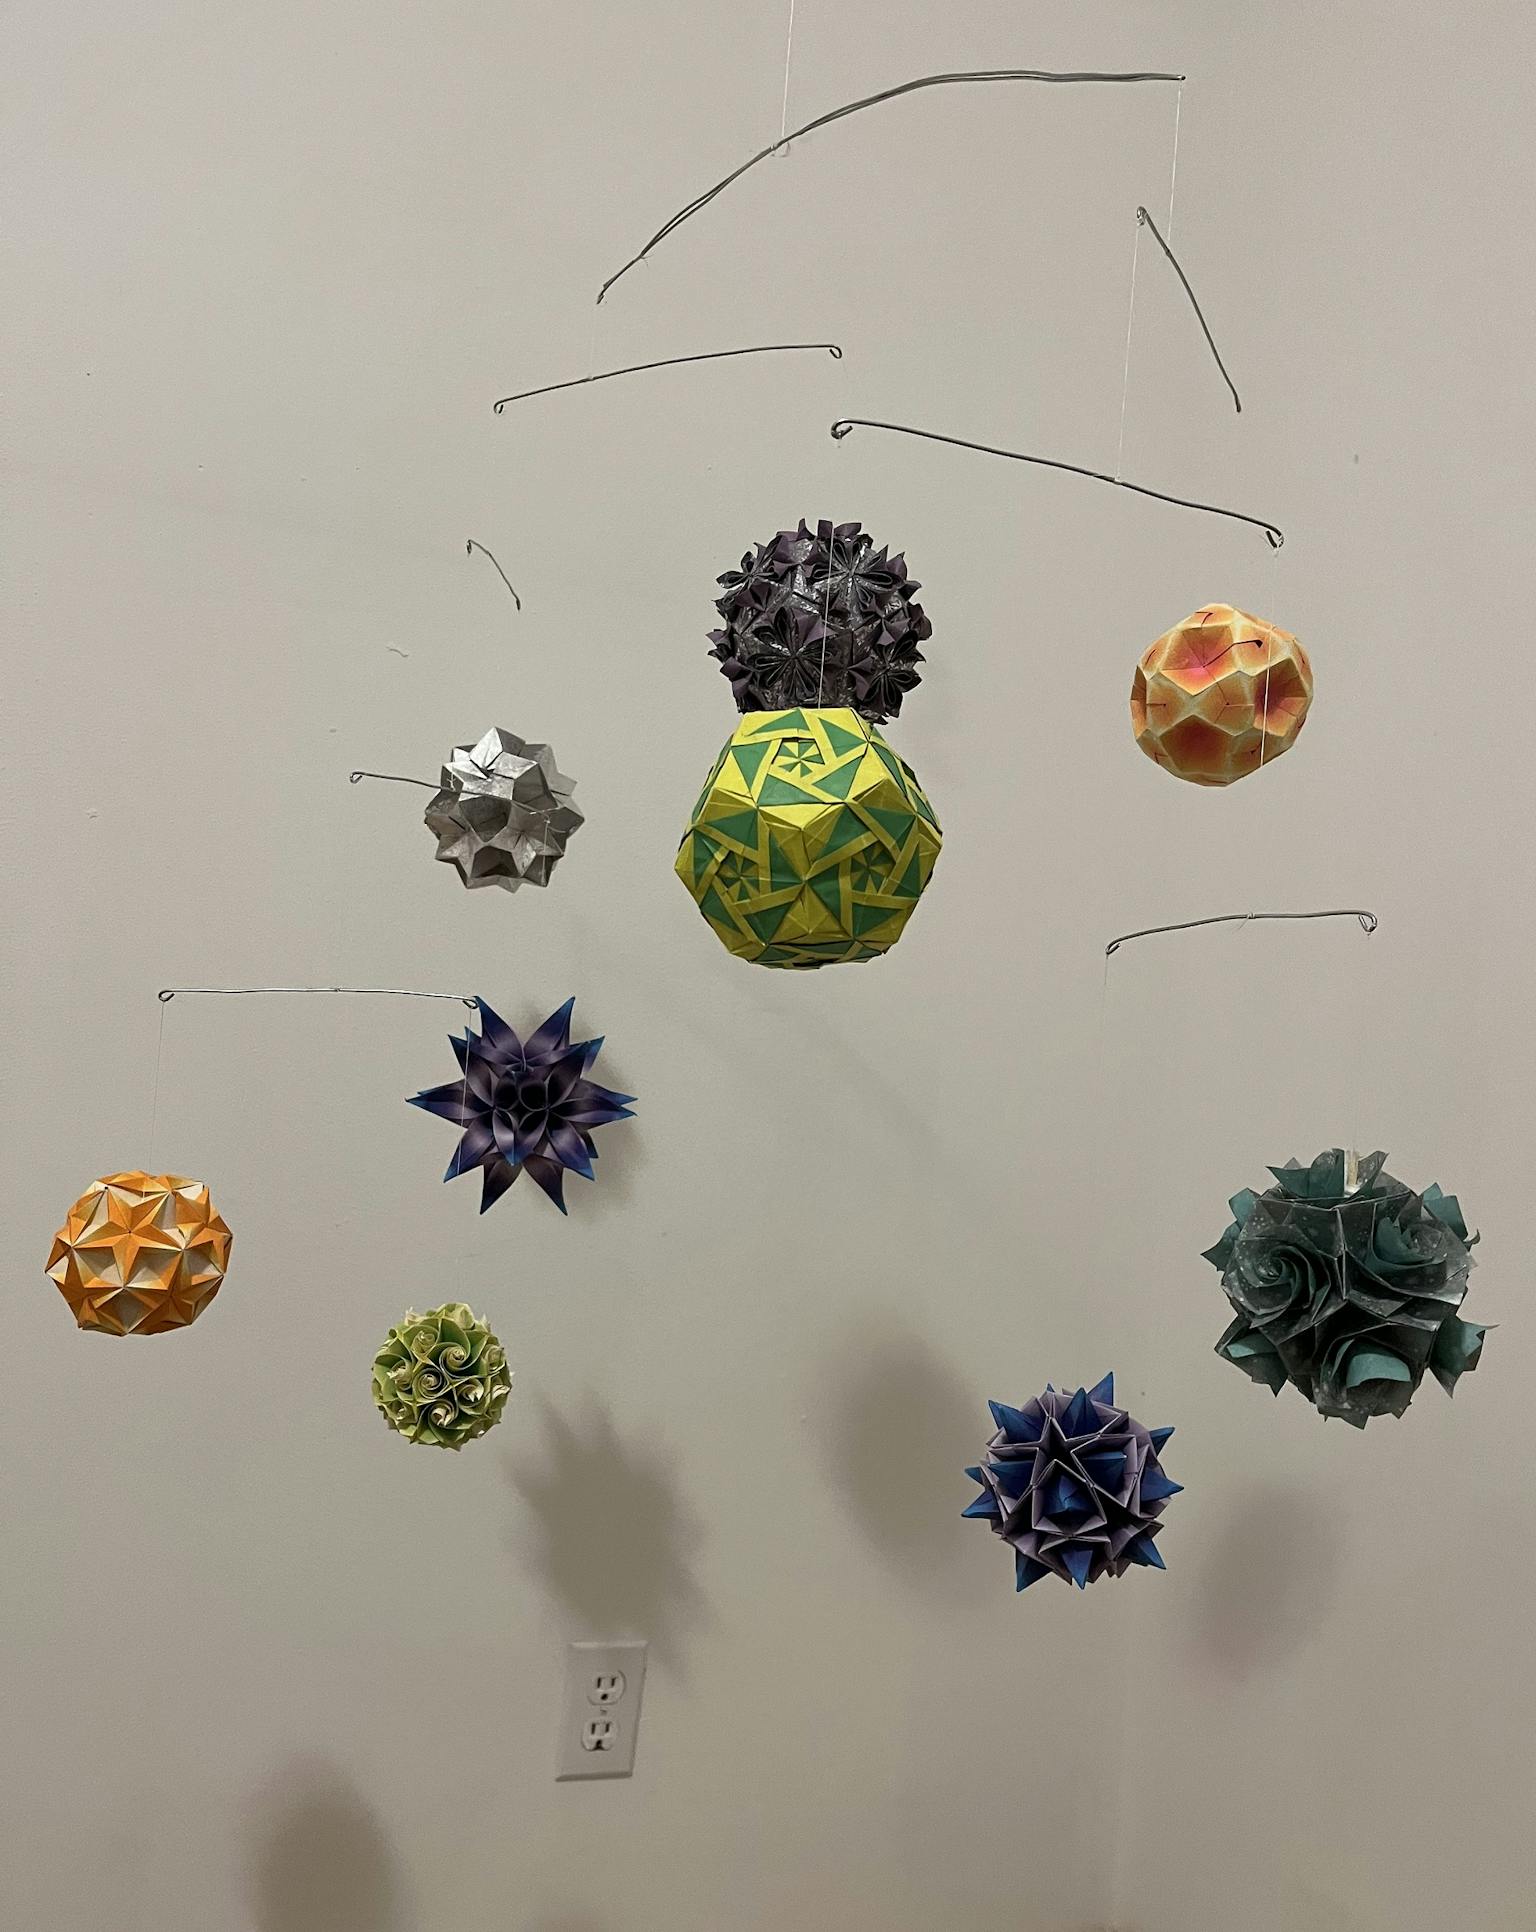 Image for entry 'Dodecahedron Variations and Transitions'